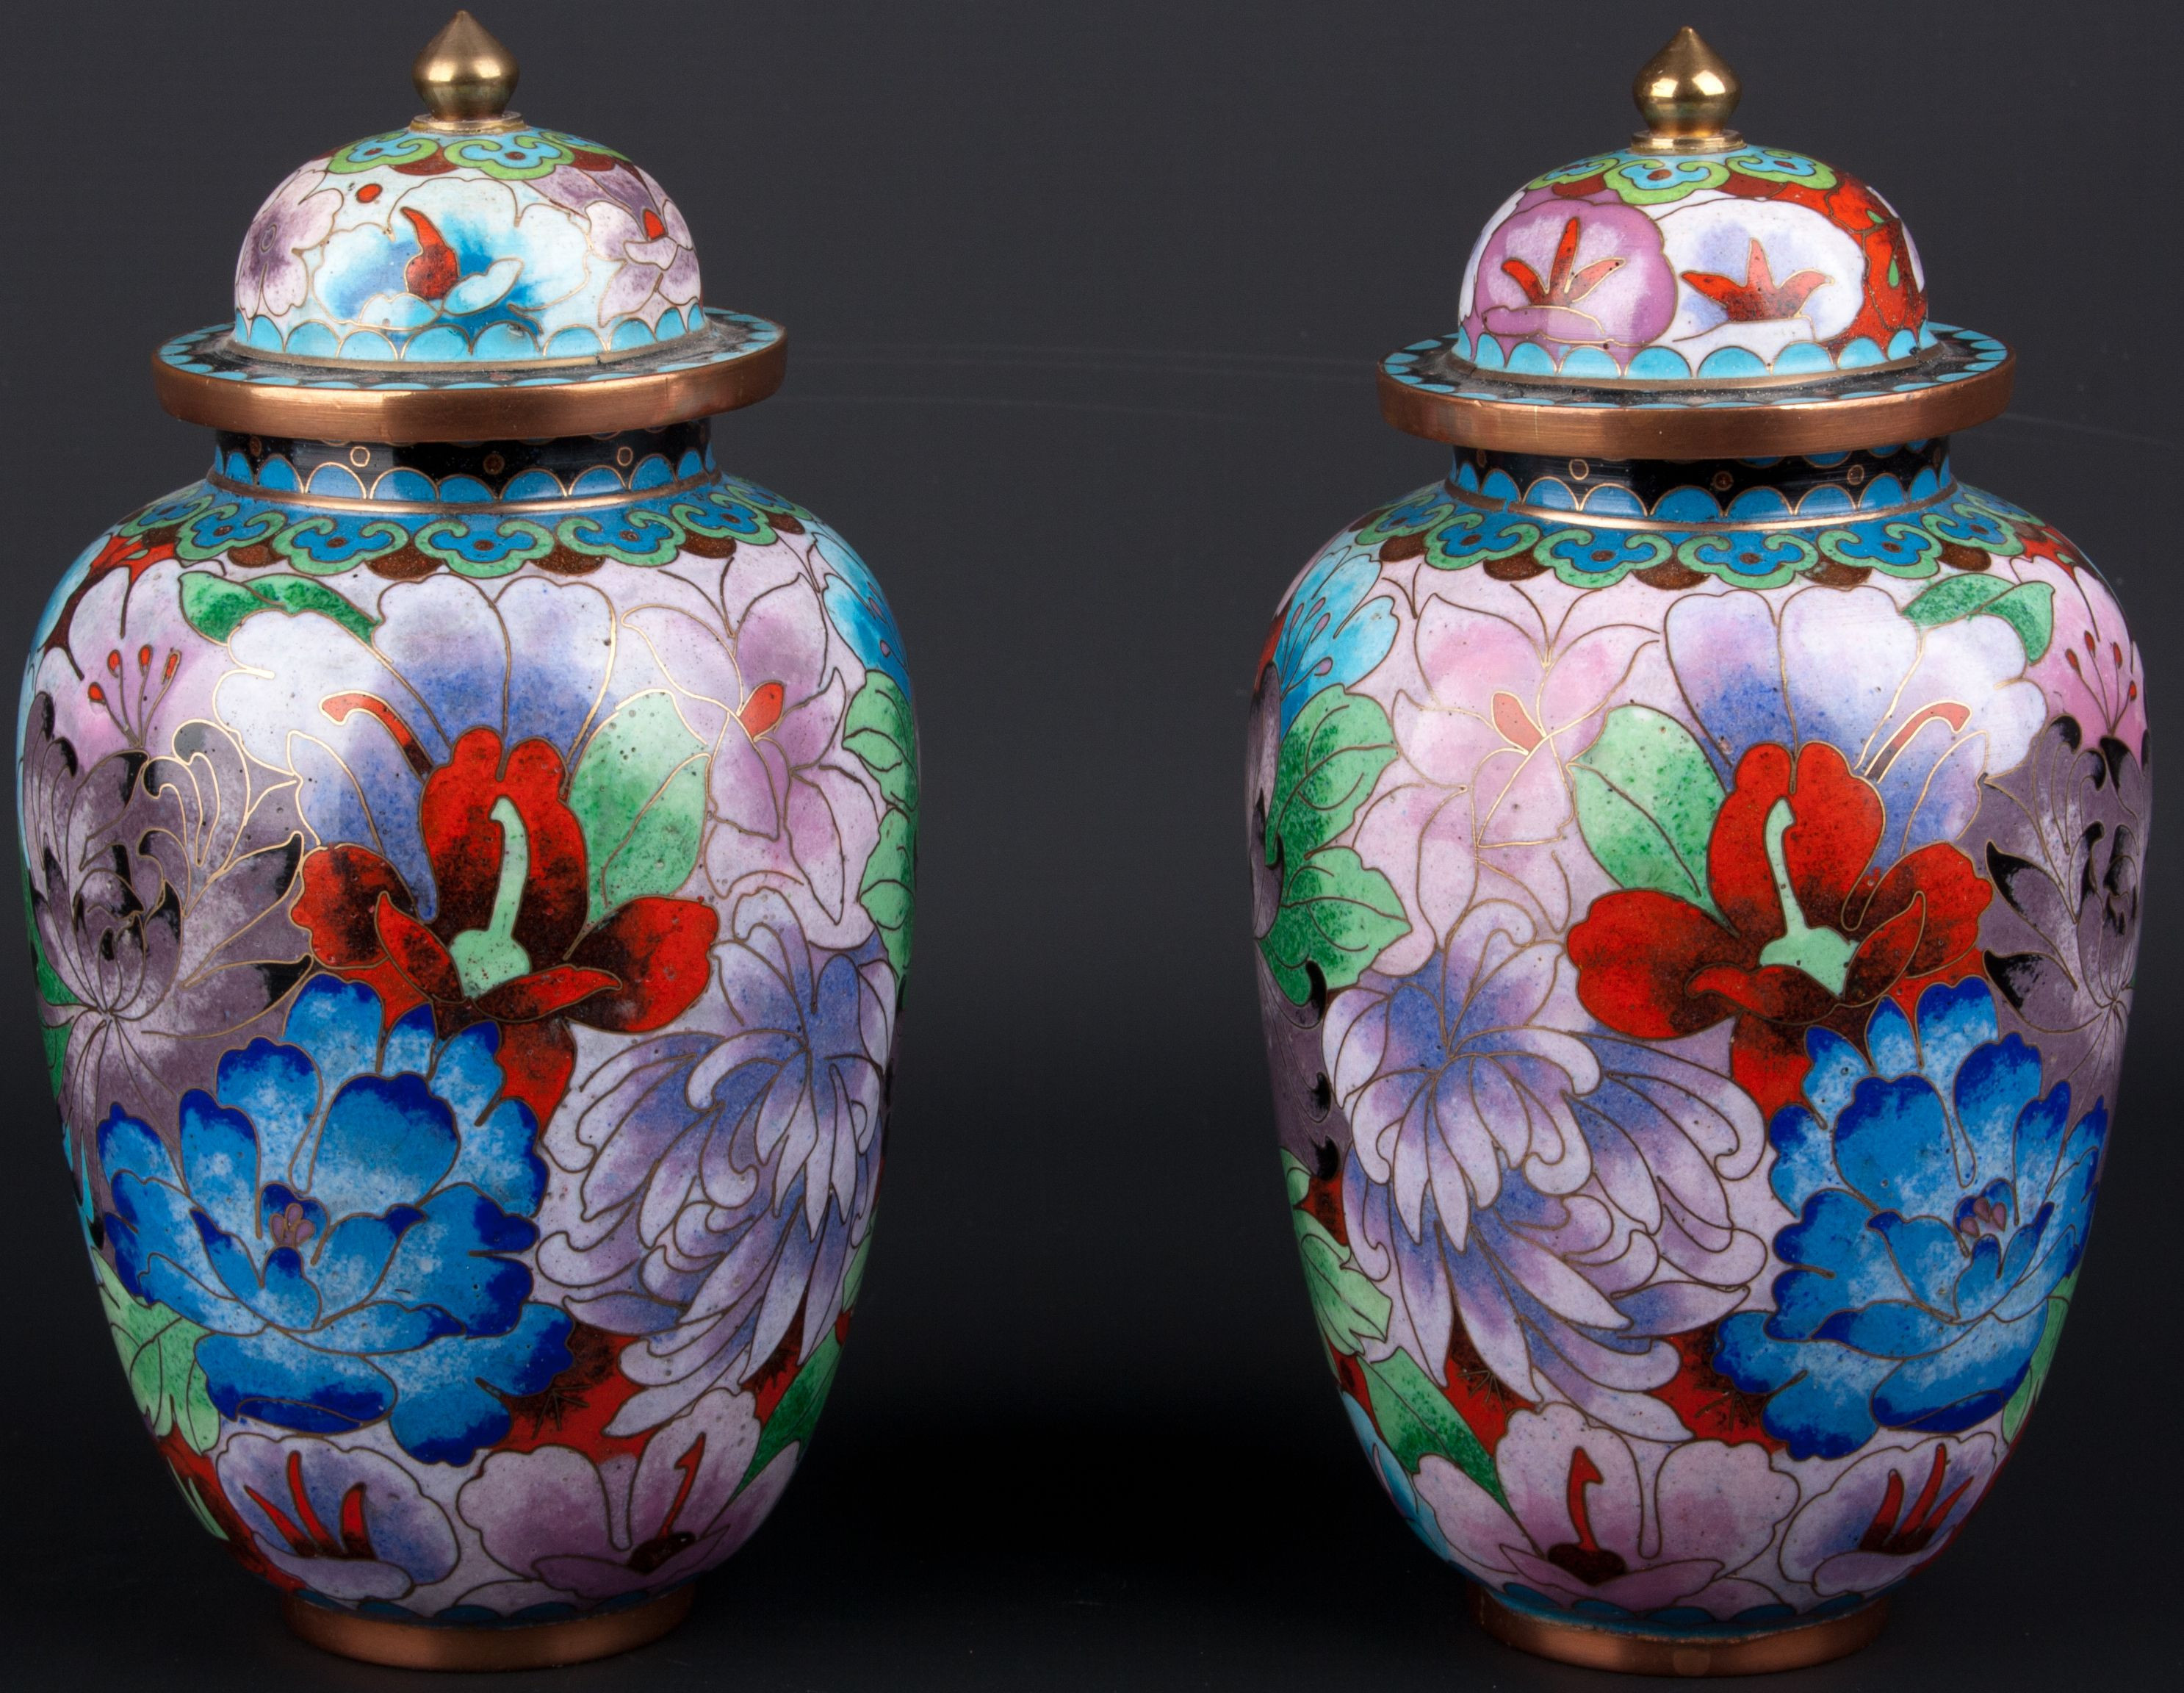 26 Great Antique Small Chinese Vases 2024 free download antique small chinese vases of description a small pair of chinese cloisonne enamel vases covers pertaining to description a small pair of chinese cloisonne enamel vases covers brightly deco